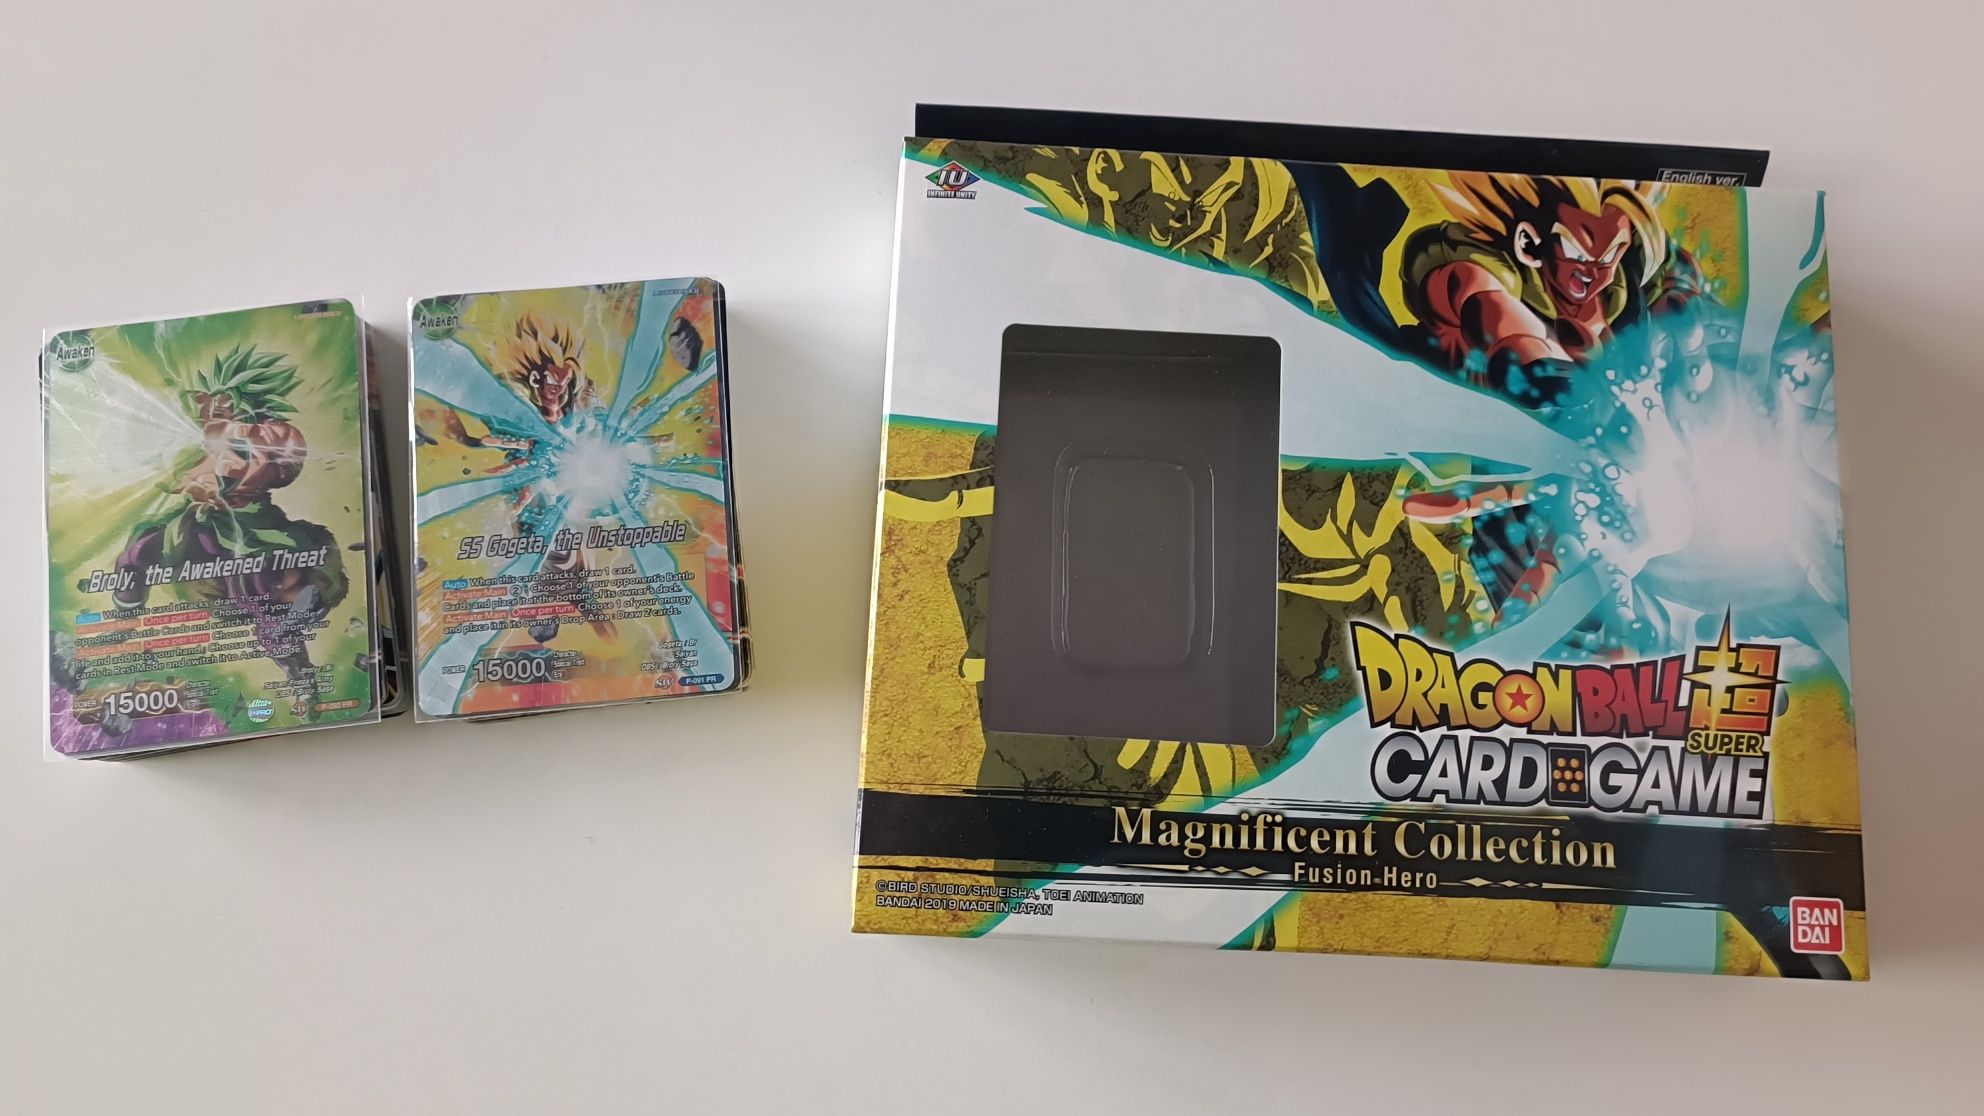 Dragon Ball Super Card Game Magnificent Collection Broly Gogeta